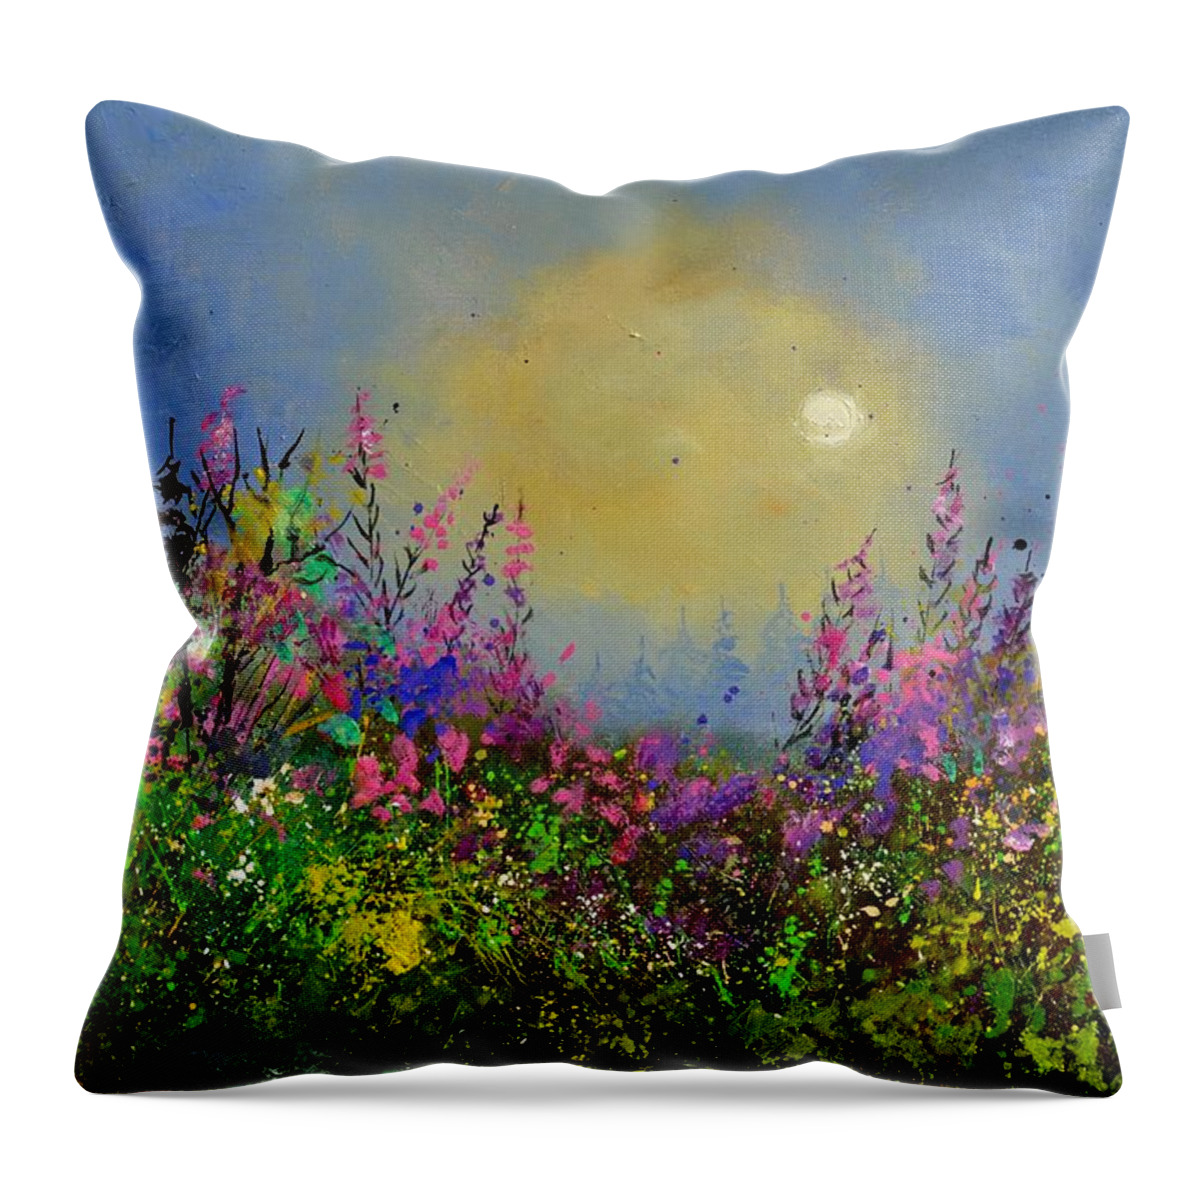 Flowers Throw Pillow featuring the painting Epilobes by Pol Ledent